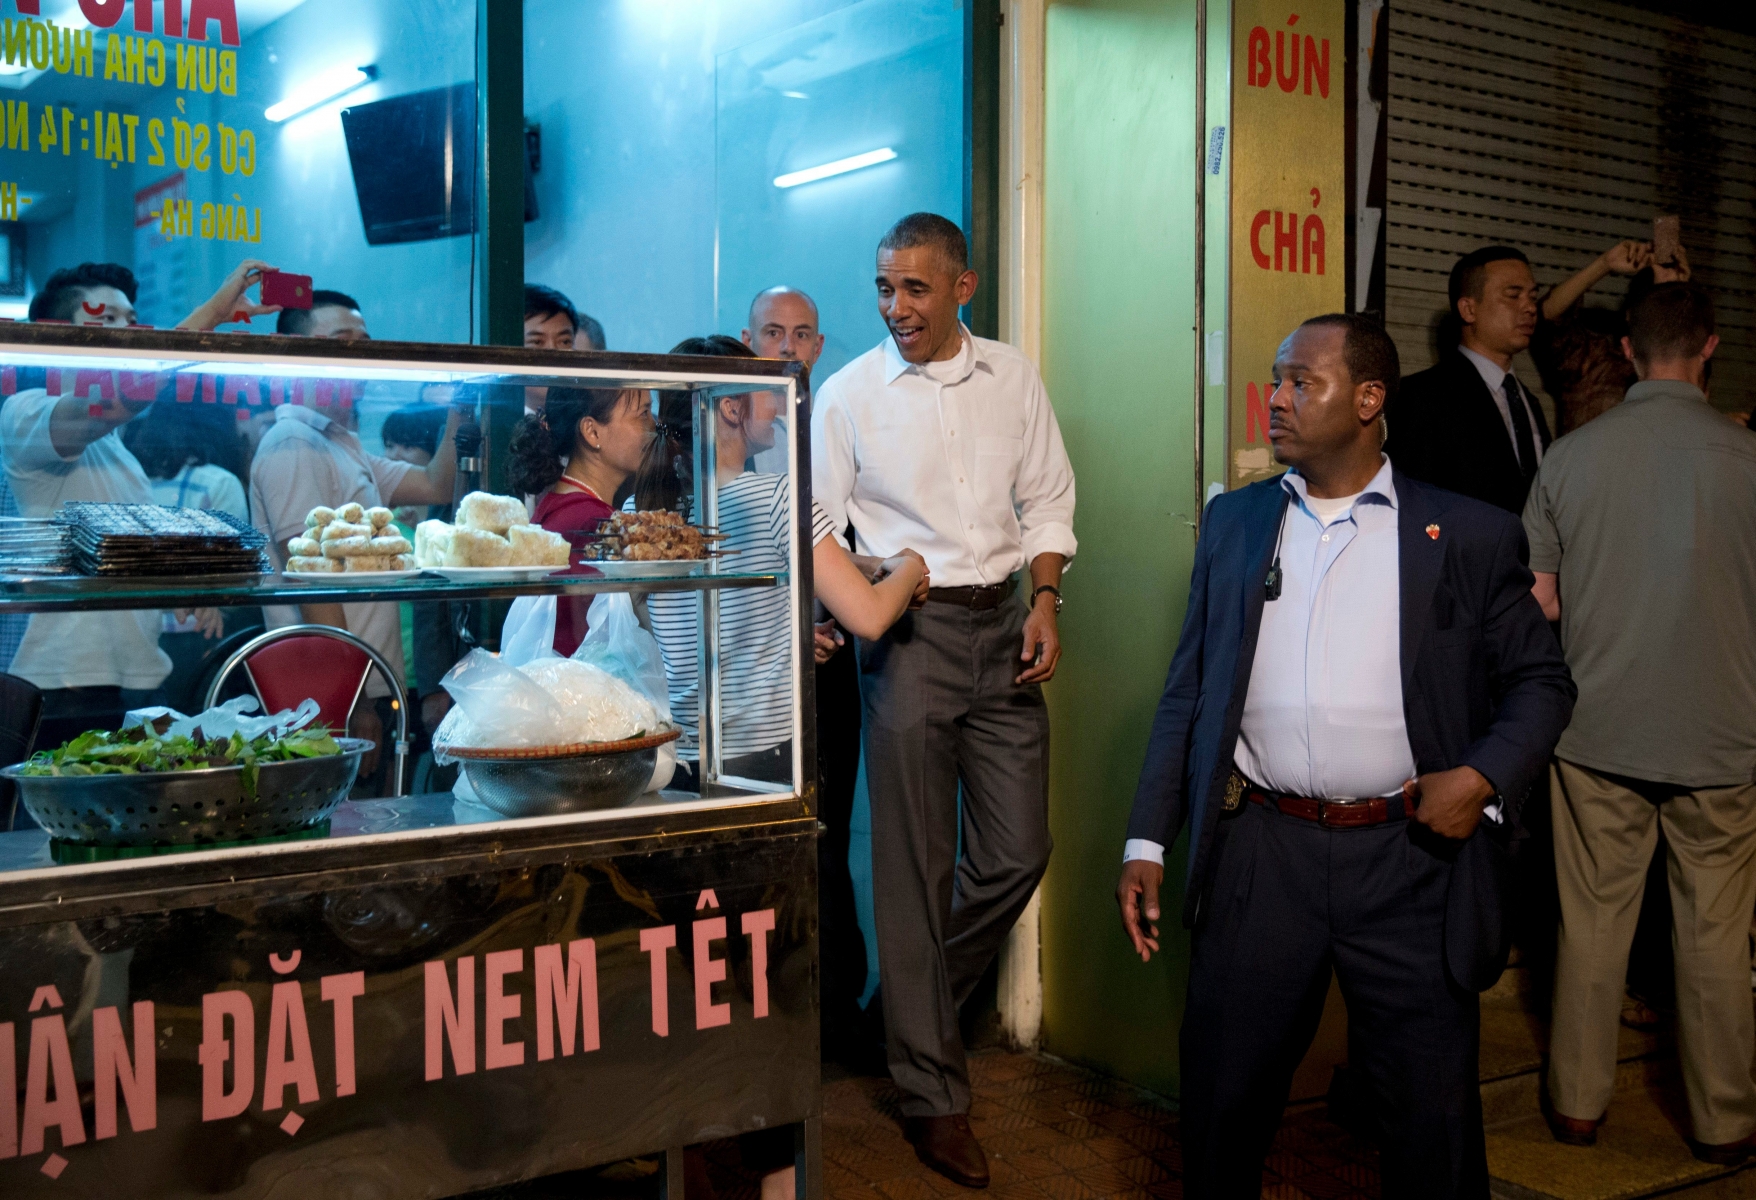 President Barack Obama greets people at the door as he walks from the Bún ch? Huong Liên restaurant after having dinner with American Chef Anthony Bourdain, Monday, May 23, 2016, in Hanoi, Vietnam. (AP Photo/Carolyn Kaster) Obama Vietnam